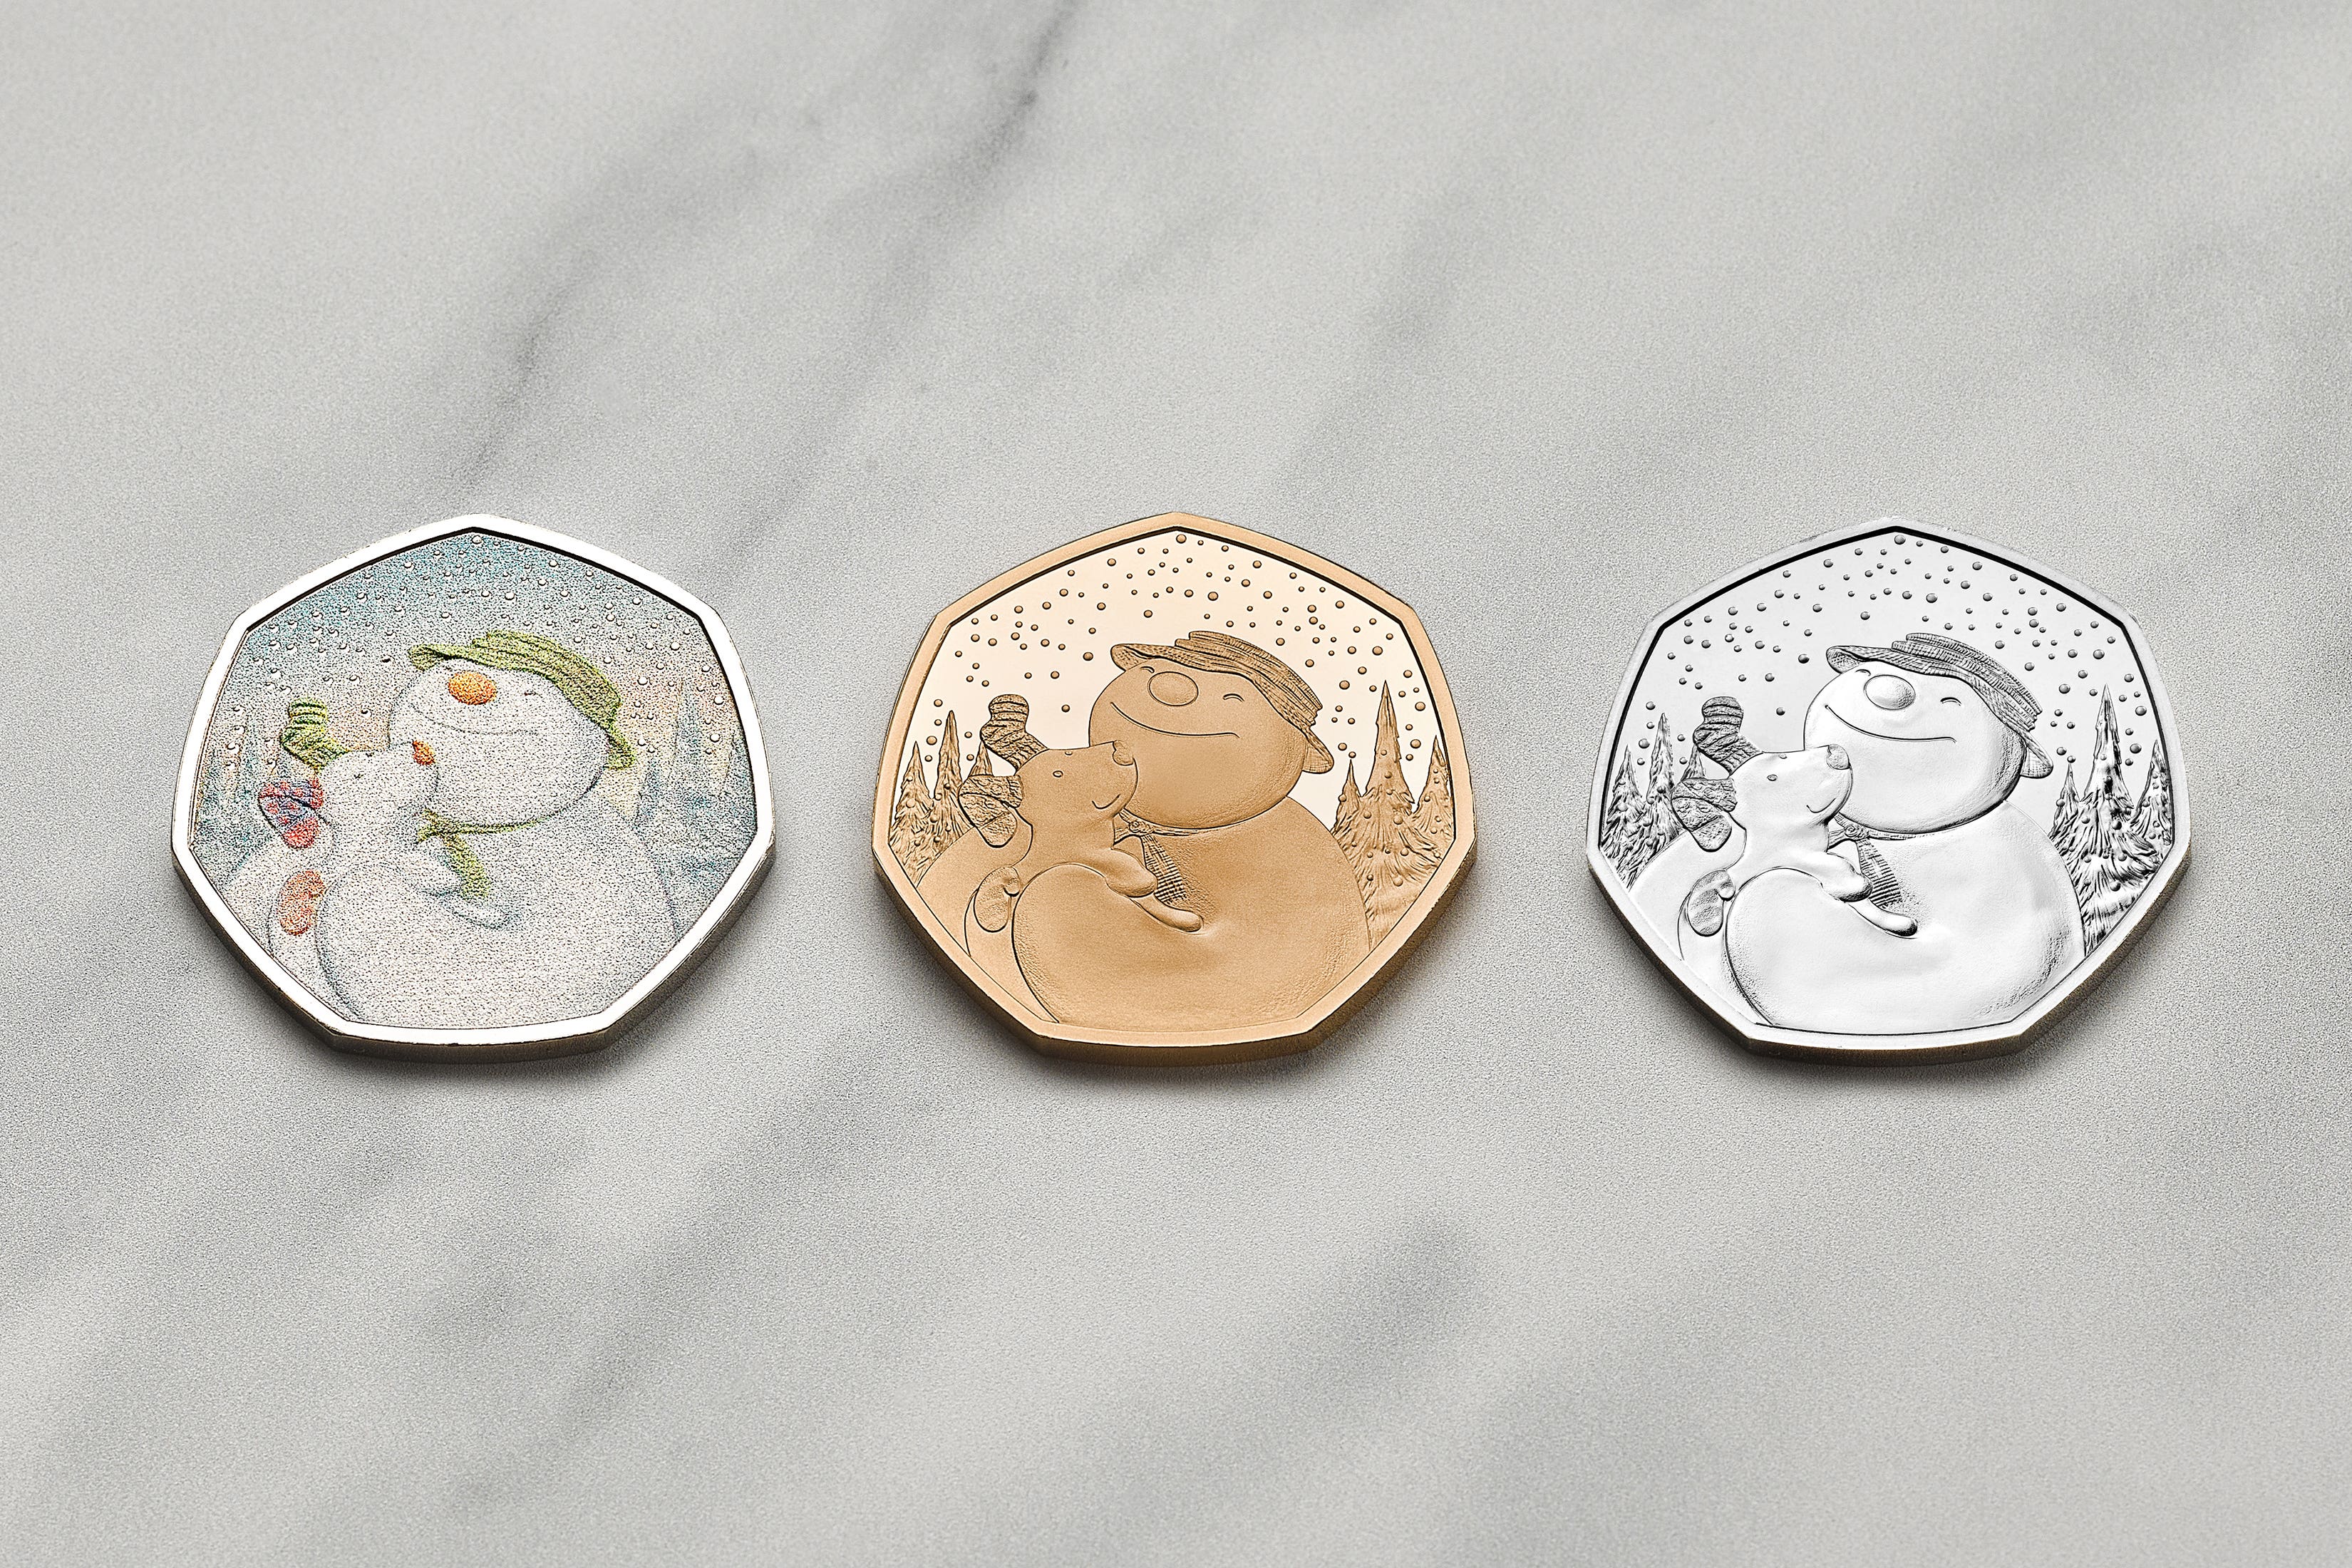 The Snowman And The Snowdog coins have been produced by the Royal Mint (Royal Mint/PA)